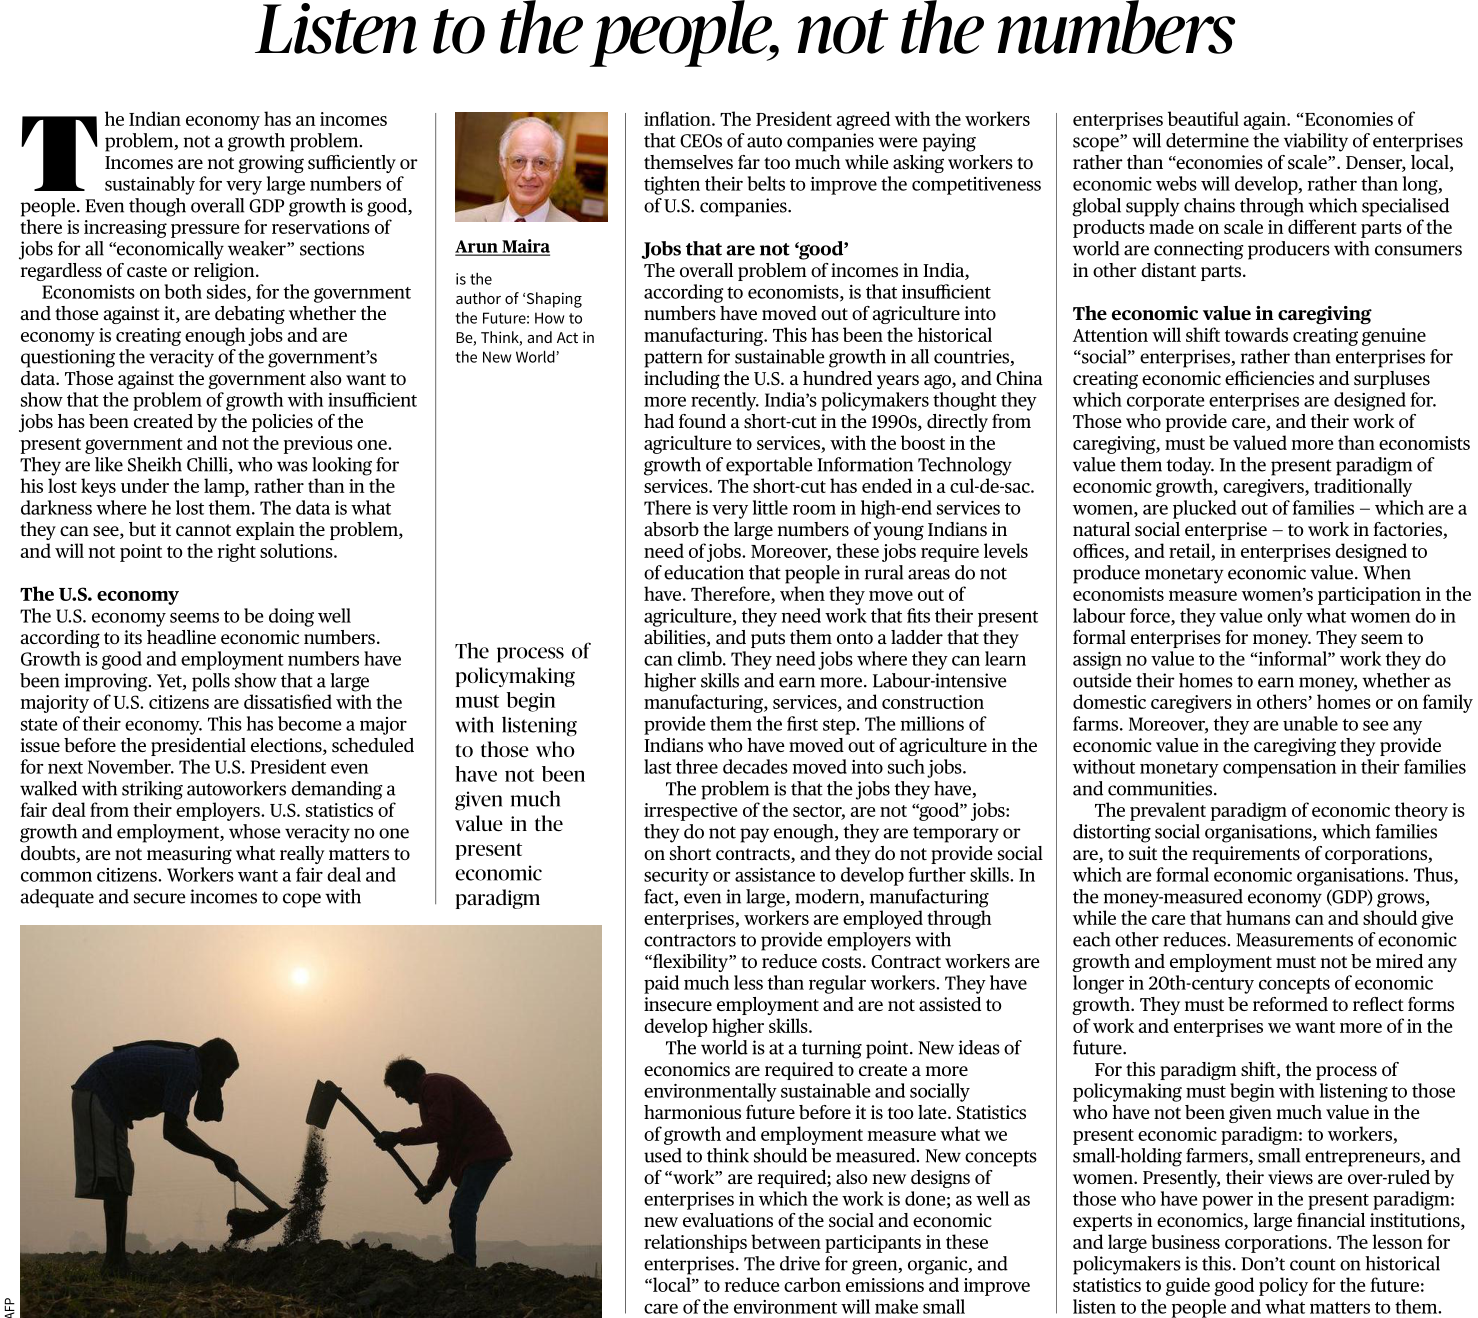 Listen to the people, not the numbers - Page No.6, GS 3